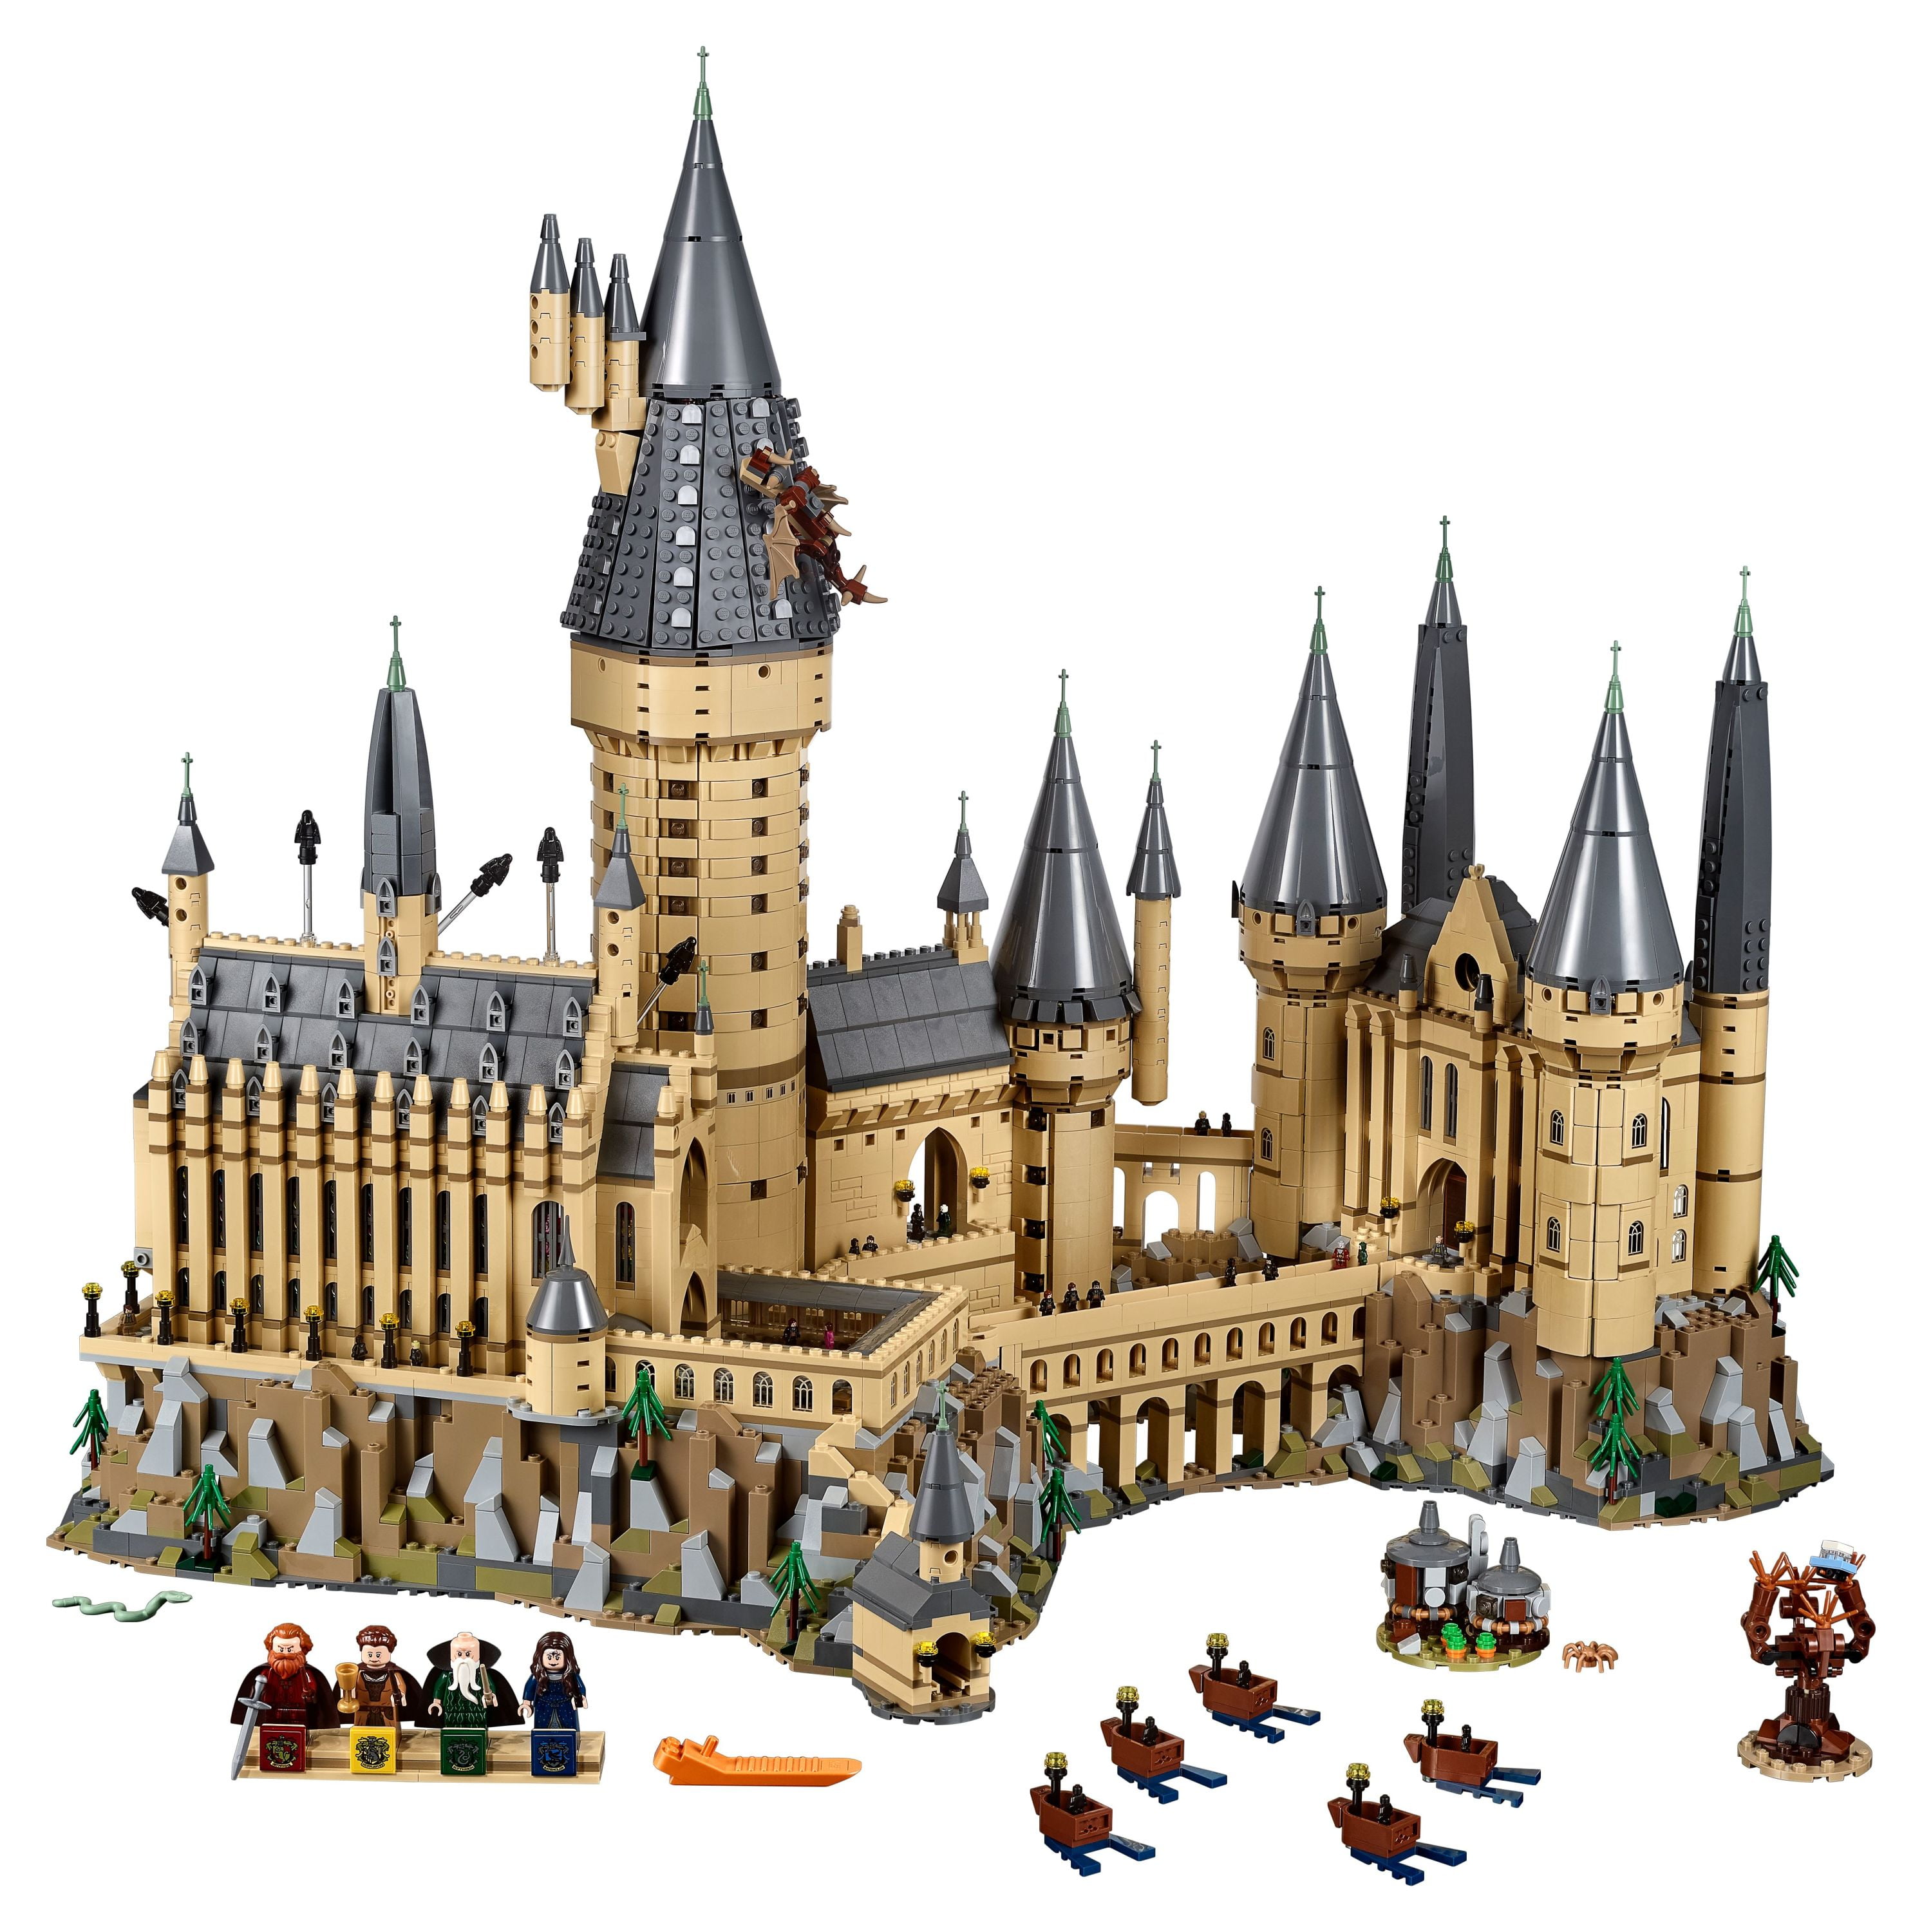 LEGO Harry Potter Hogwarts Castle 71043 Model, Big Collectable Set the Great Hall, Sword of Gryffindor, Chamber Secrets, Hut of Hagrid, Willow Tree, Includes 27 Minifigures - Walmart.com